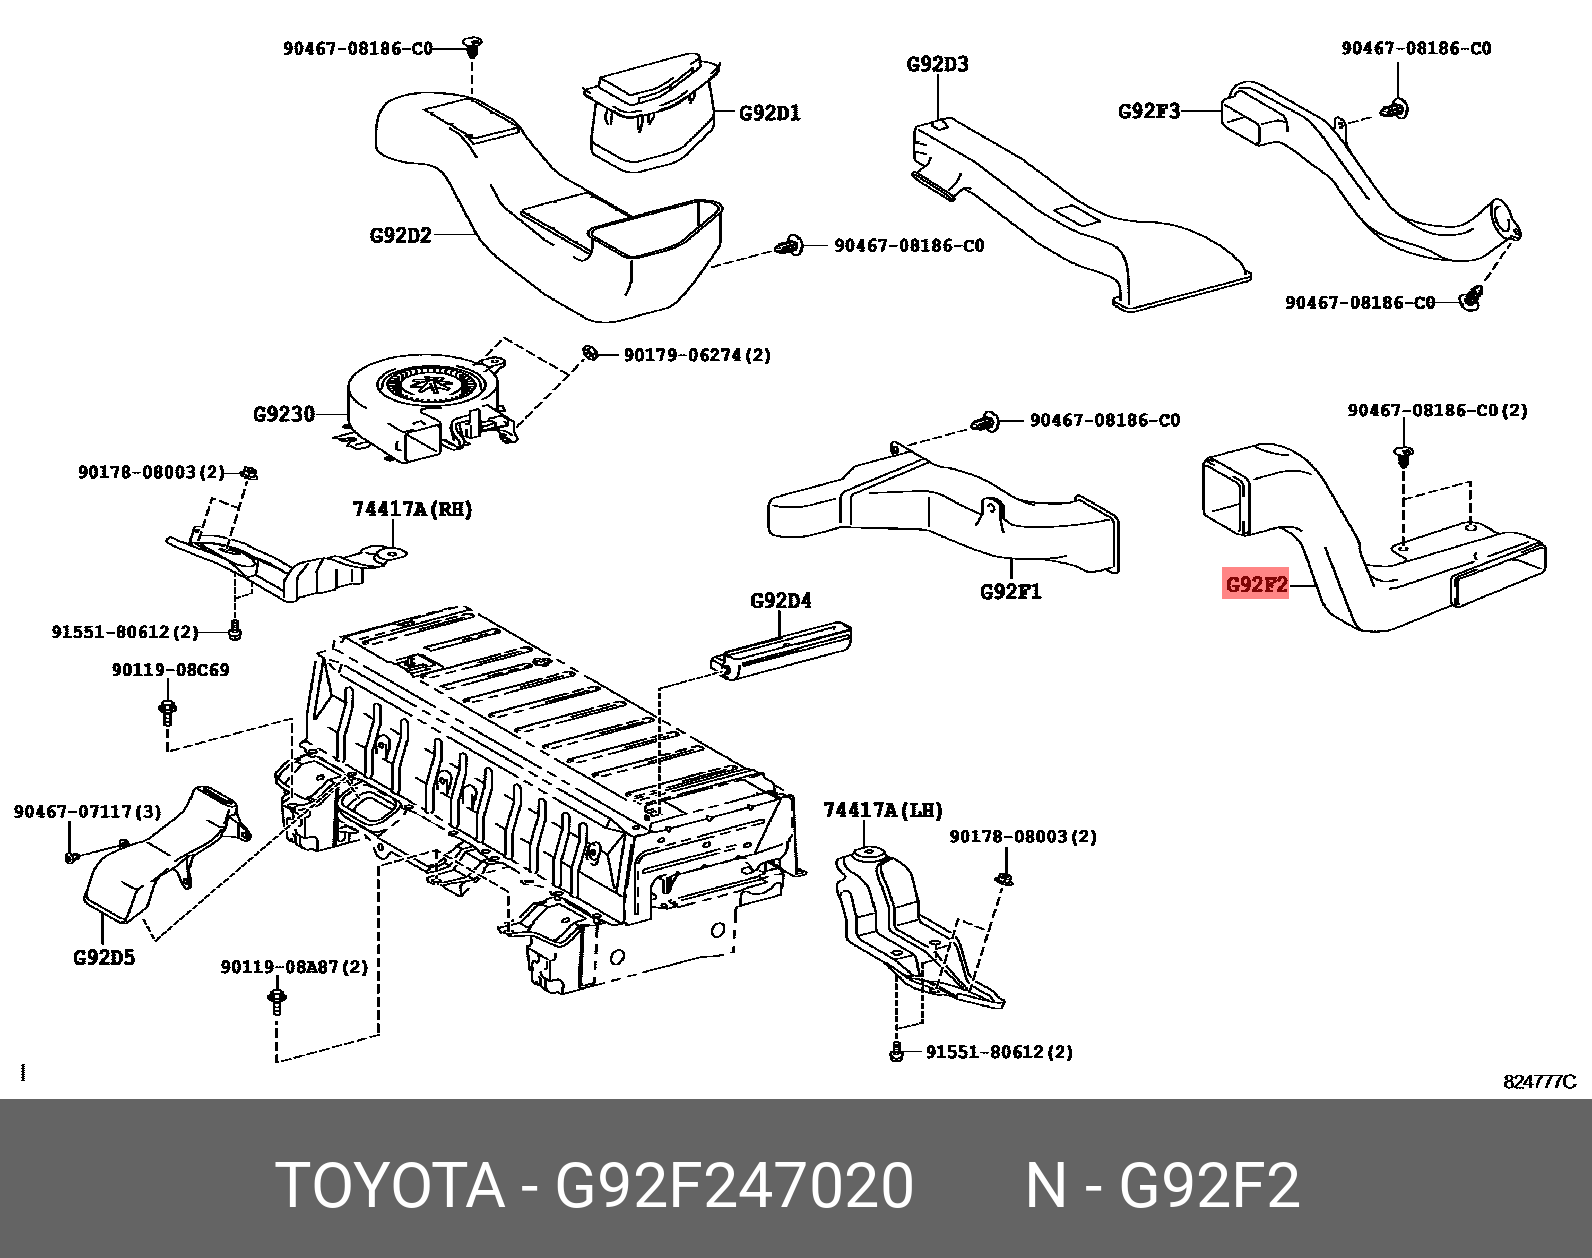 PRIUS (PLUG-IN HBD) 201201 - 201604, DUCT, HYBRID BATTERY EXHAUST, NO.2